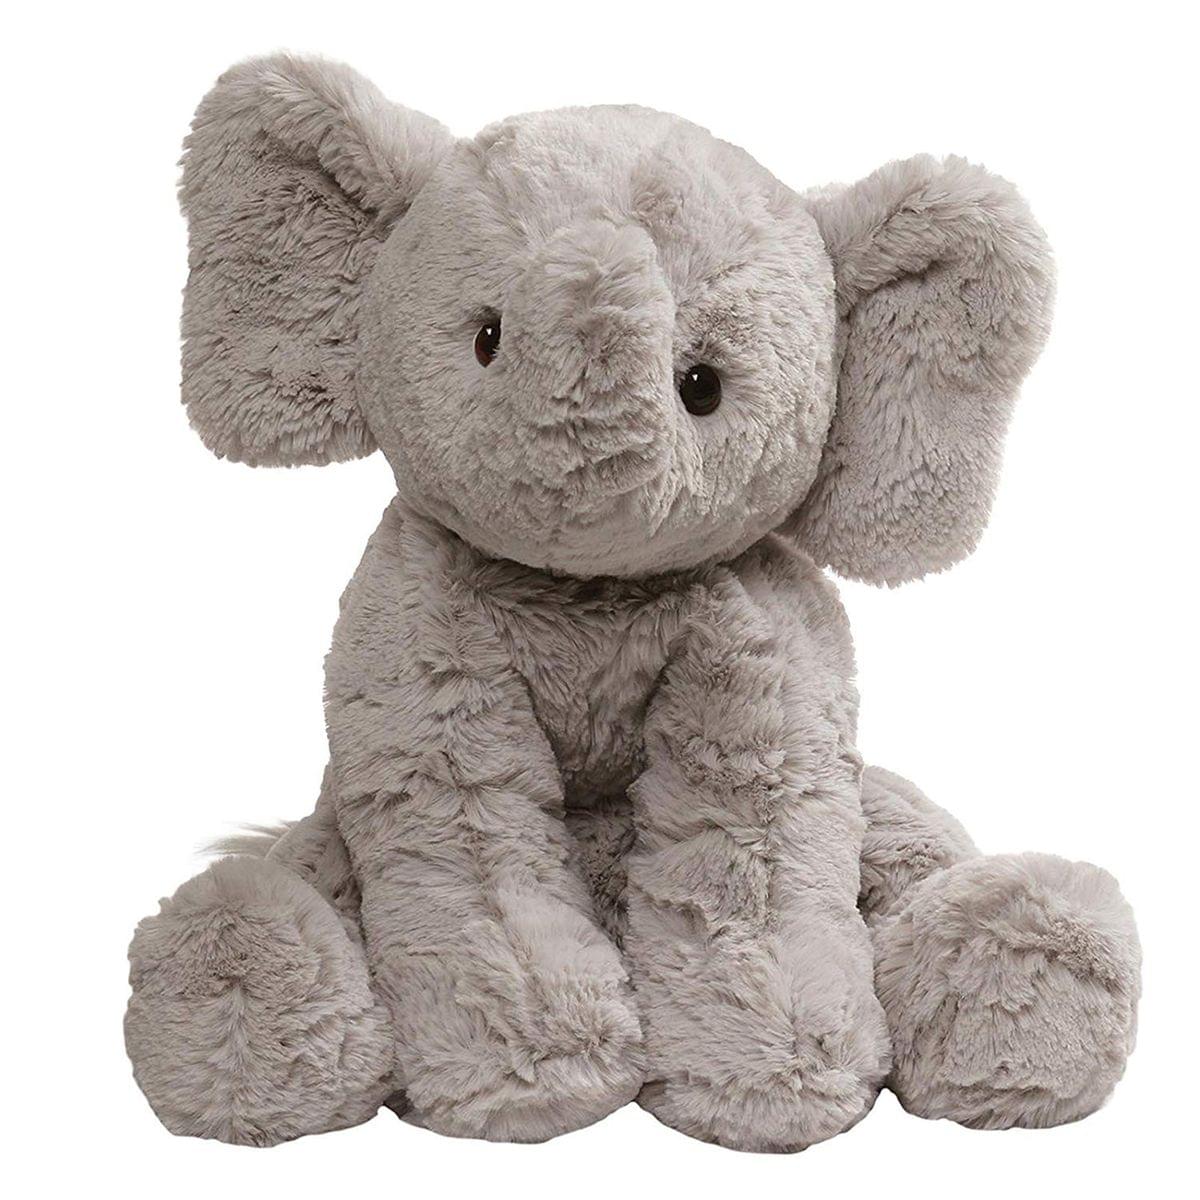 Cozys Collection Elephant 10-Inch Plush